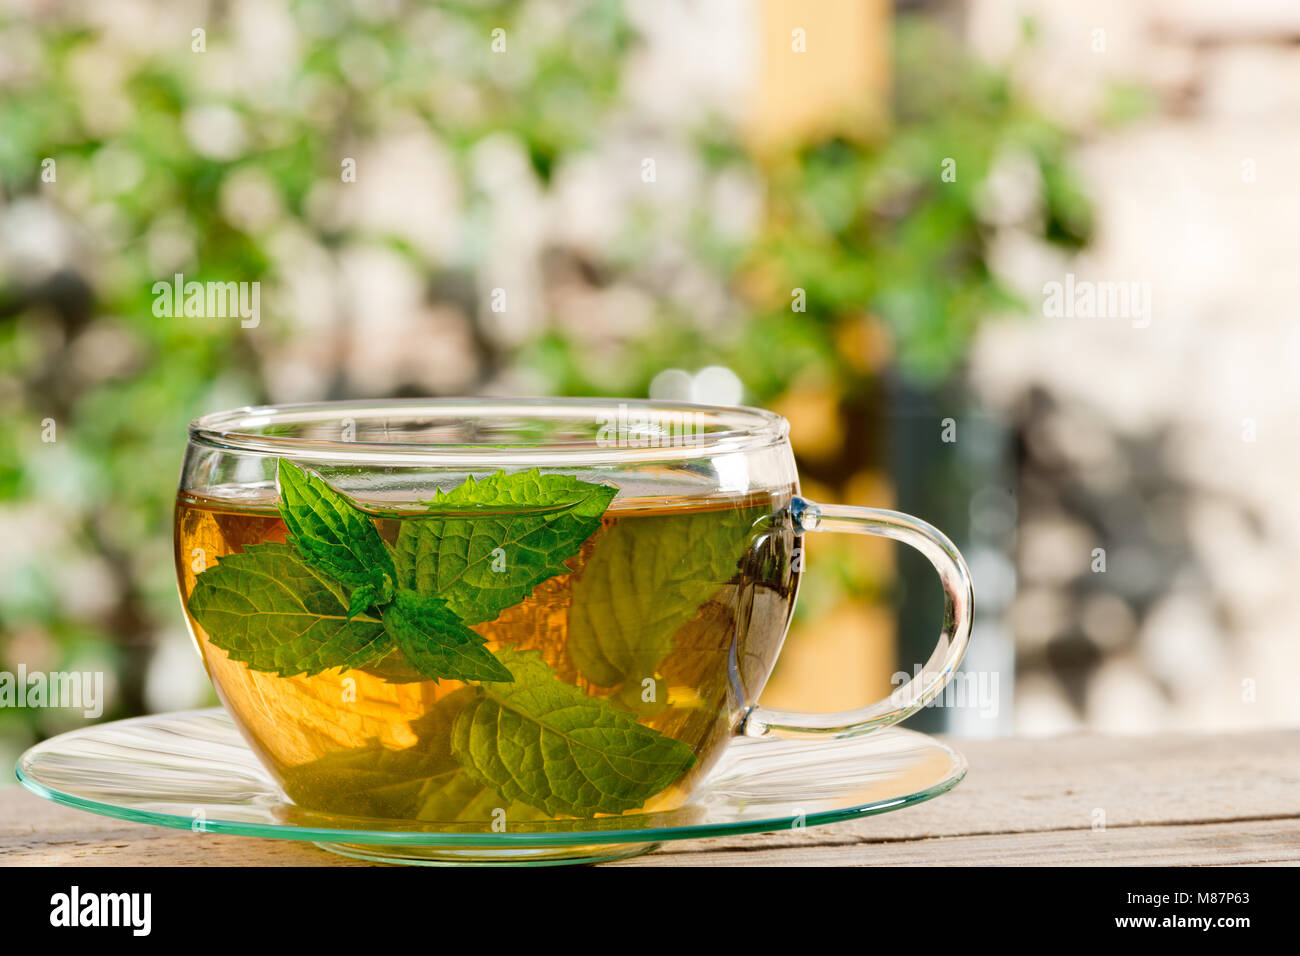 Glass of Tea on the Wooden Desk in the Garden Stock Photo